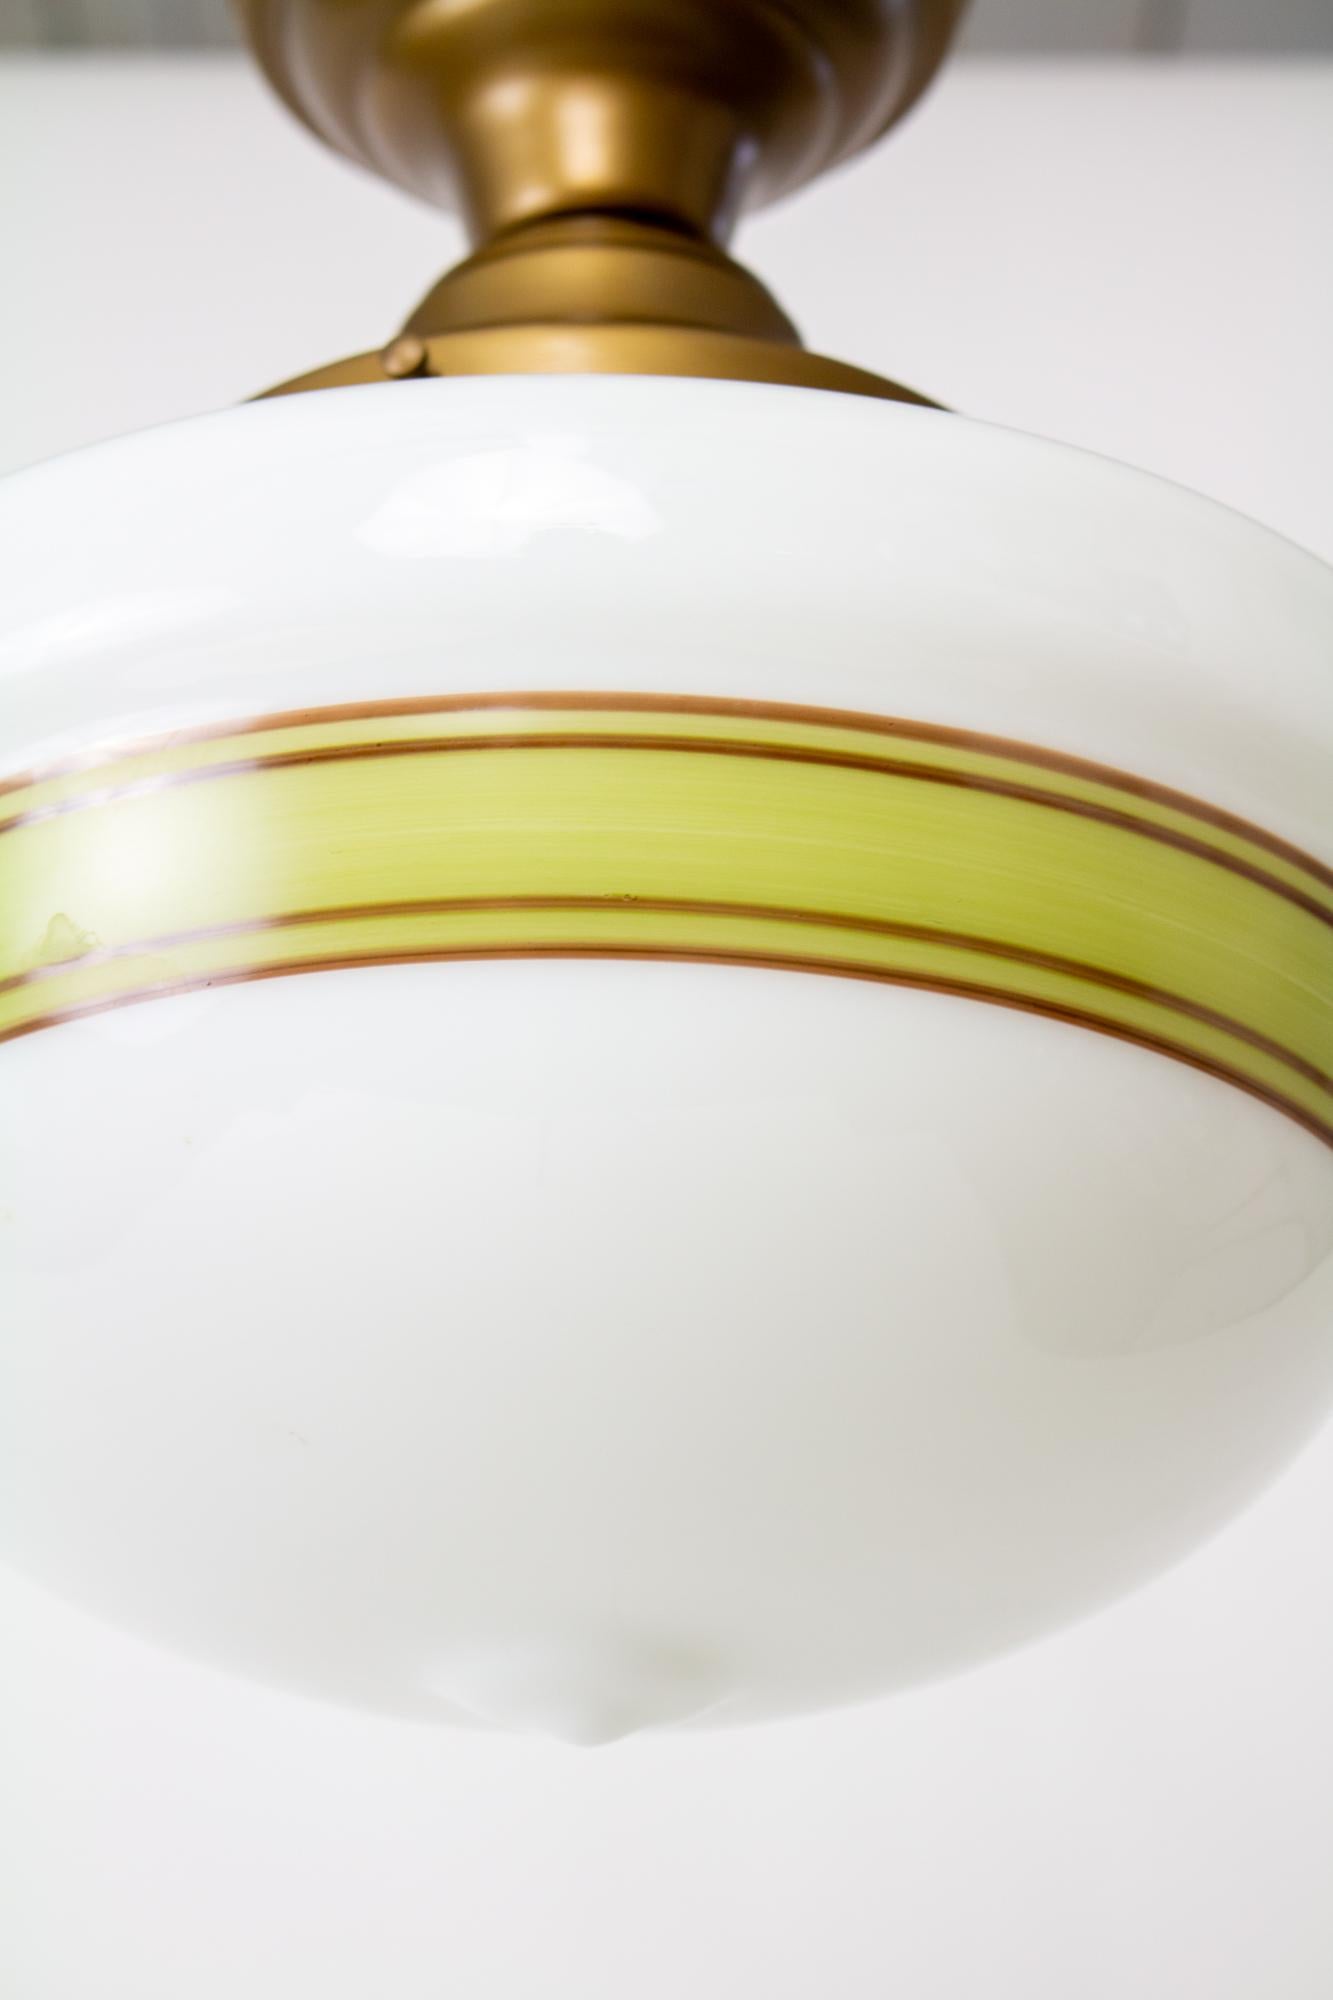 Flush mounted painted schoolhouse fixture. Antique brass finish on new metal fixture. Milk glass in the classic schoolhouse shape with a ring of avocado green and brown stripes. Glass is reproduction, from the early 2000’s. In new condition. US 120V